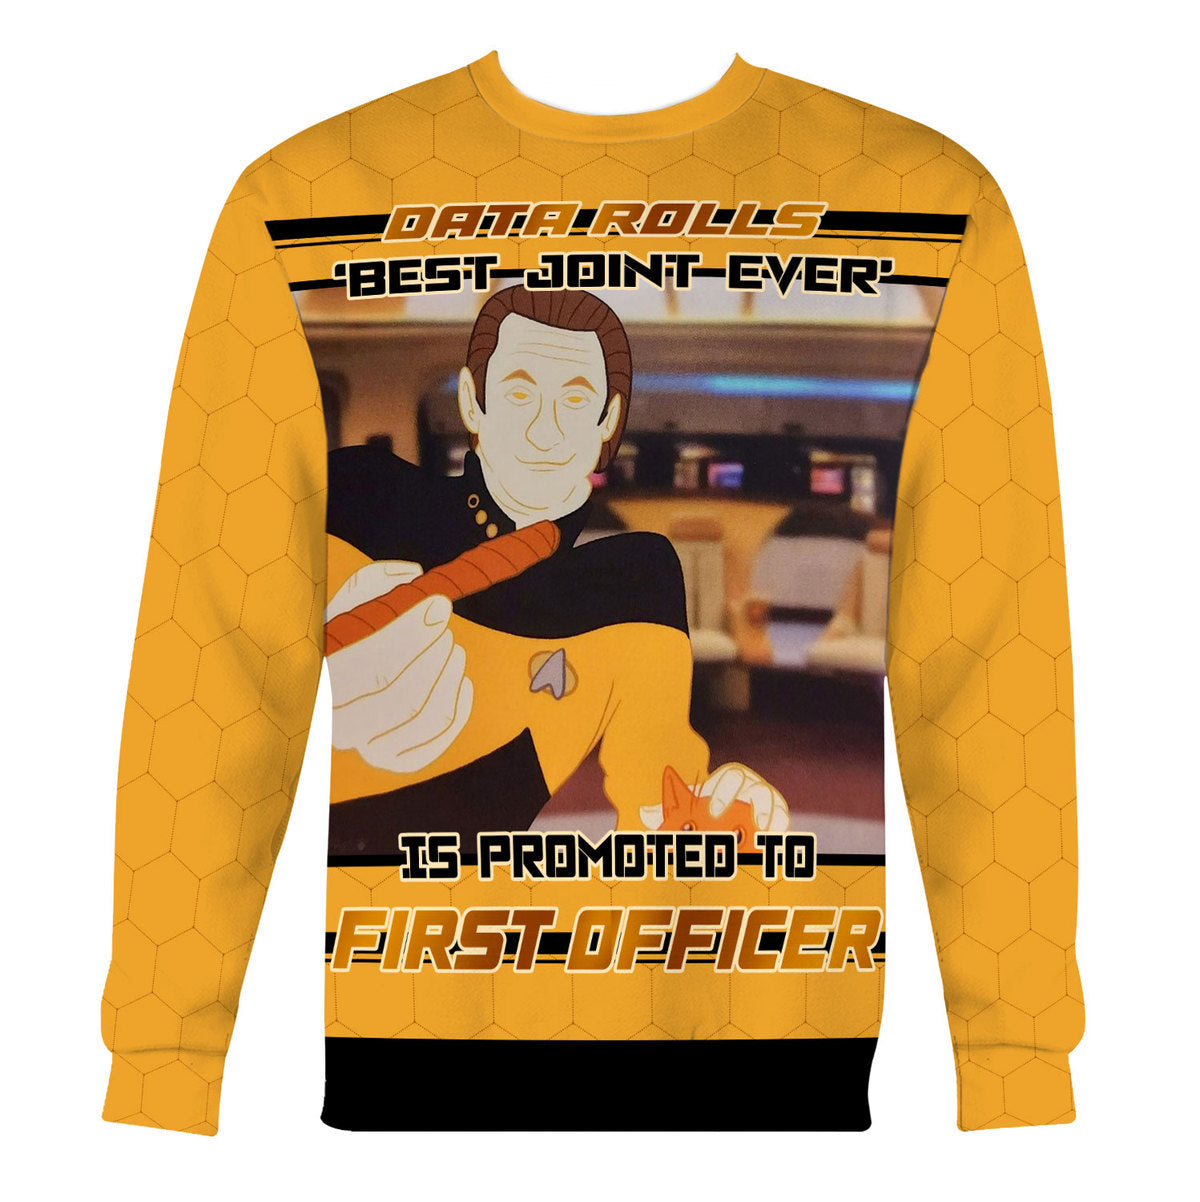 Star Trek Talented Data Cool - Sweater - Ugly Christmas Sweater